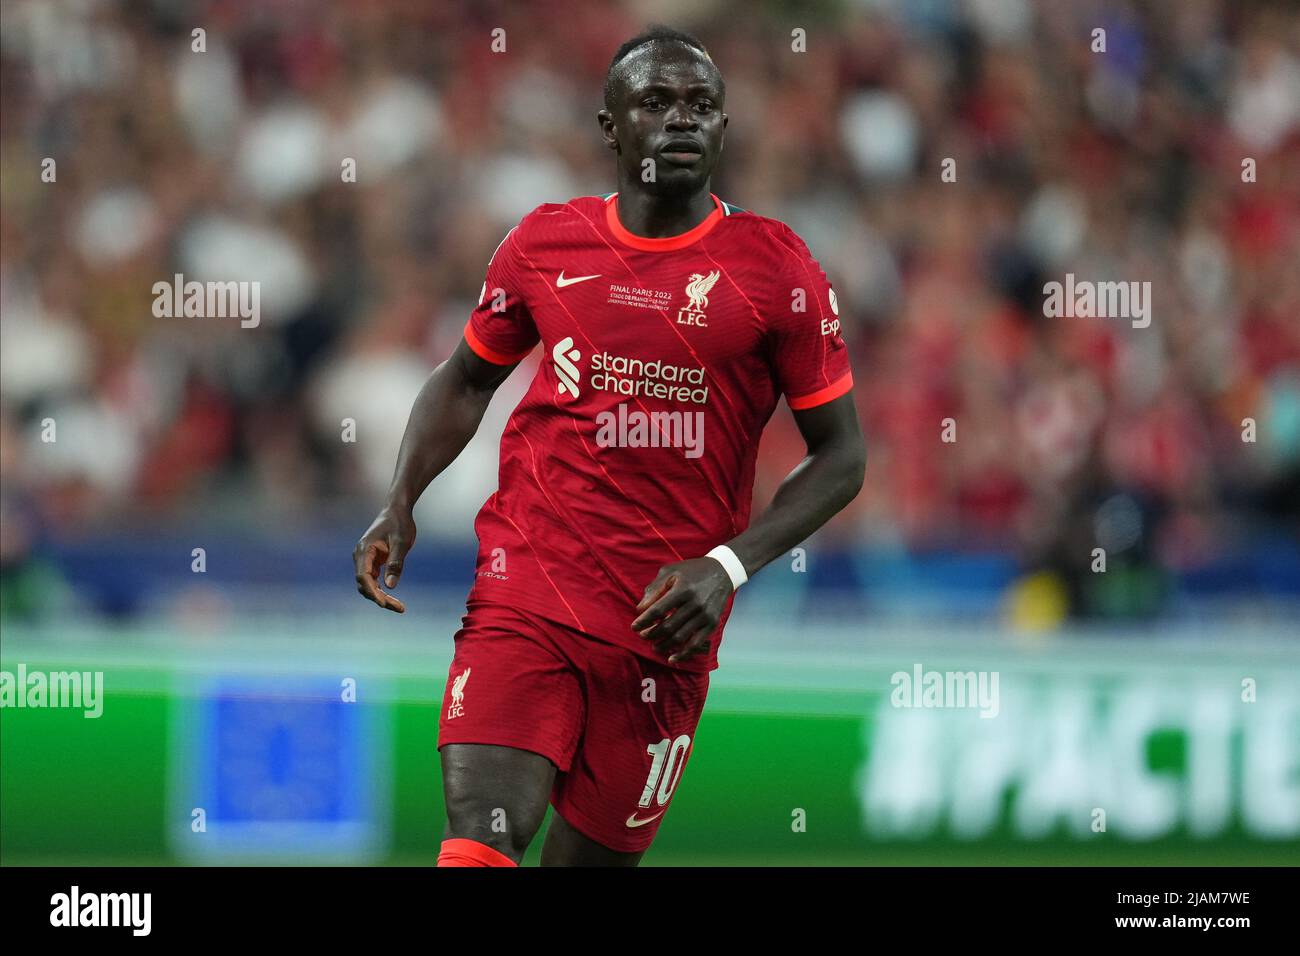 Sadio Mane of Liverpool FC during the UEFA Champions League Final match between Liverpool FC and Real Madrid played at Stade de France on May 28, 2022 in Paris, France. (Photo by Magma) Stock Photo